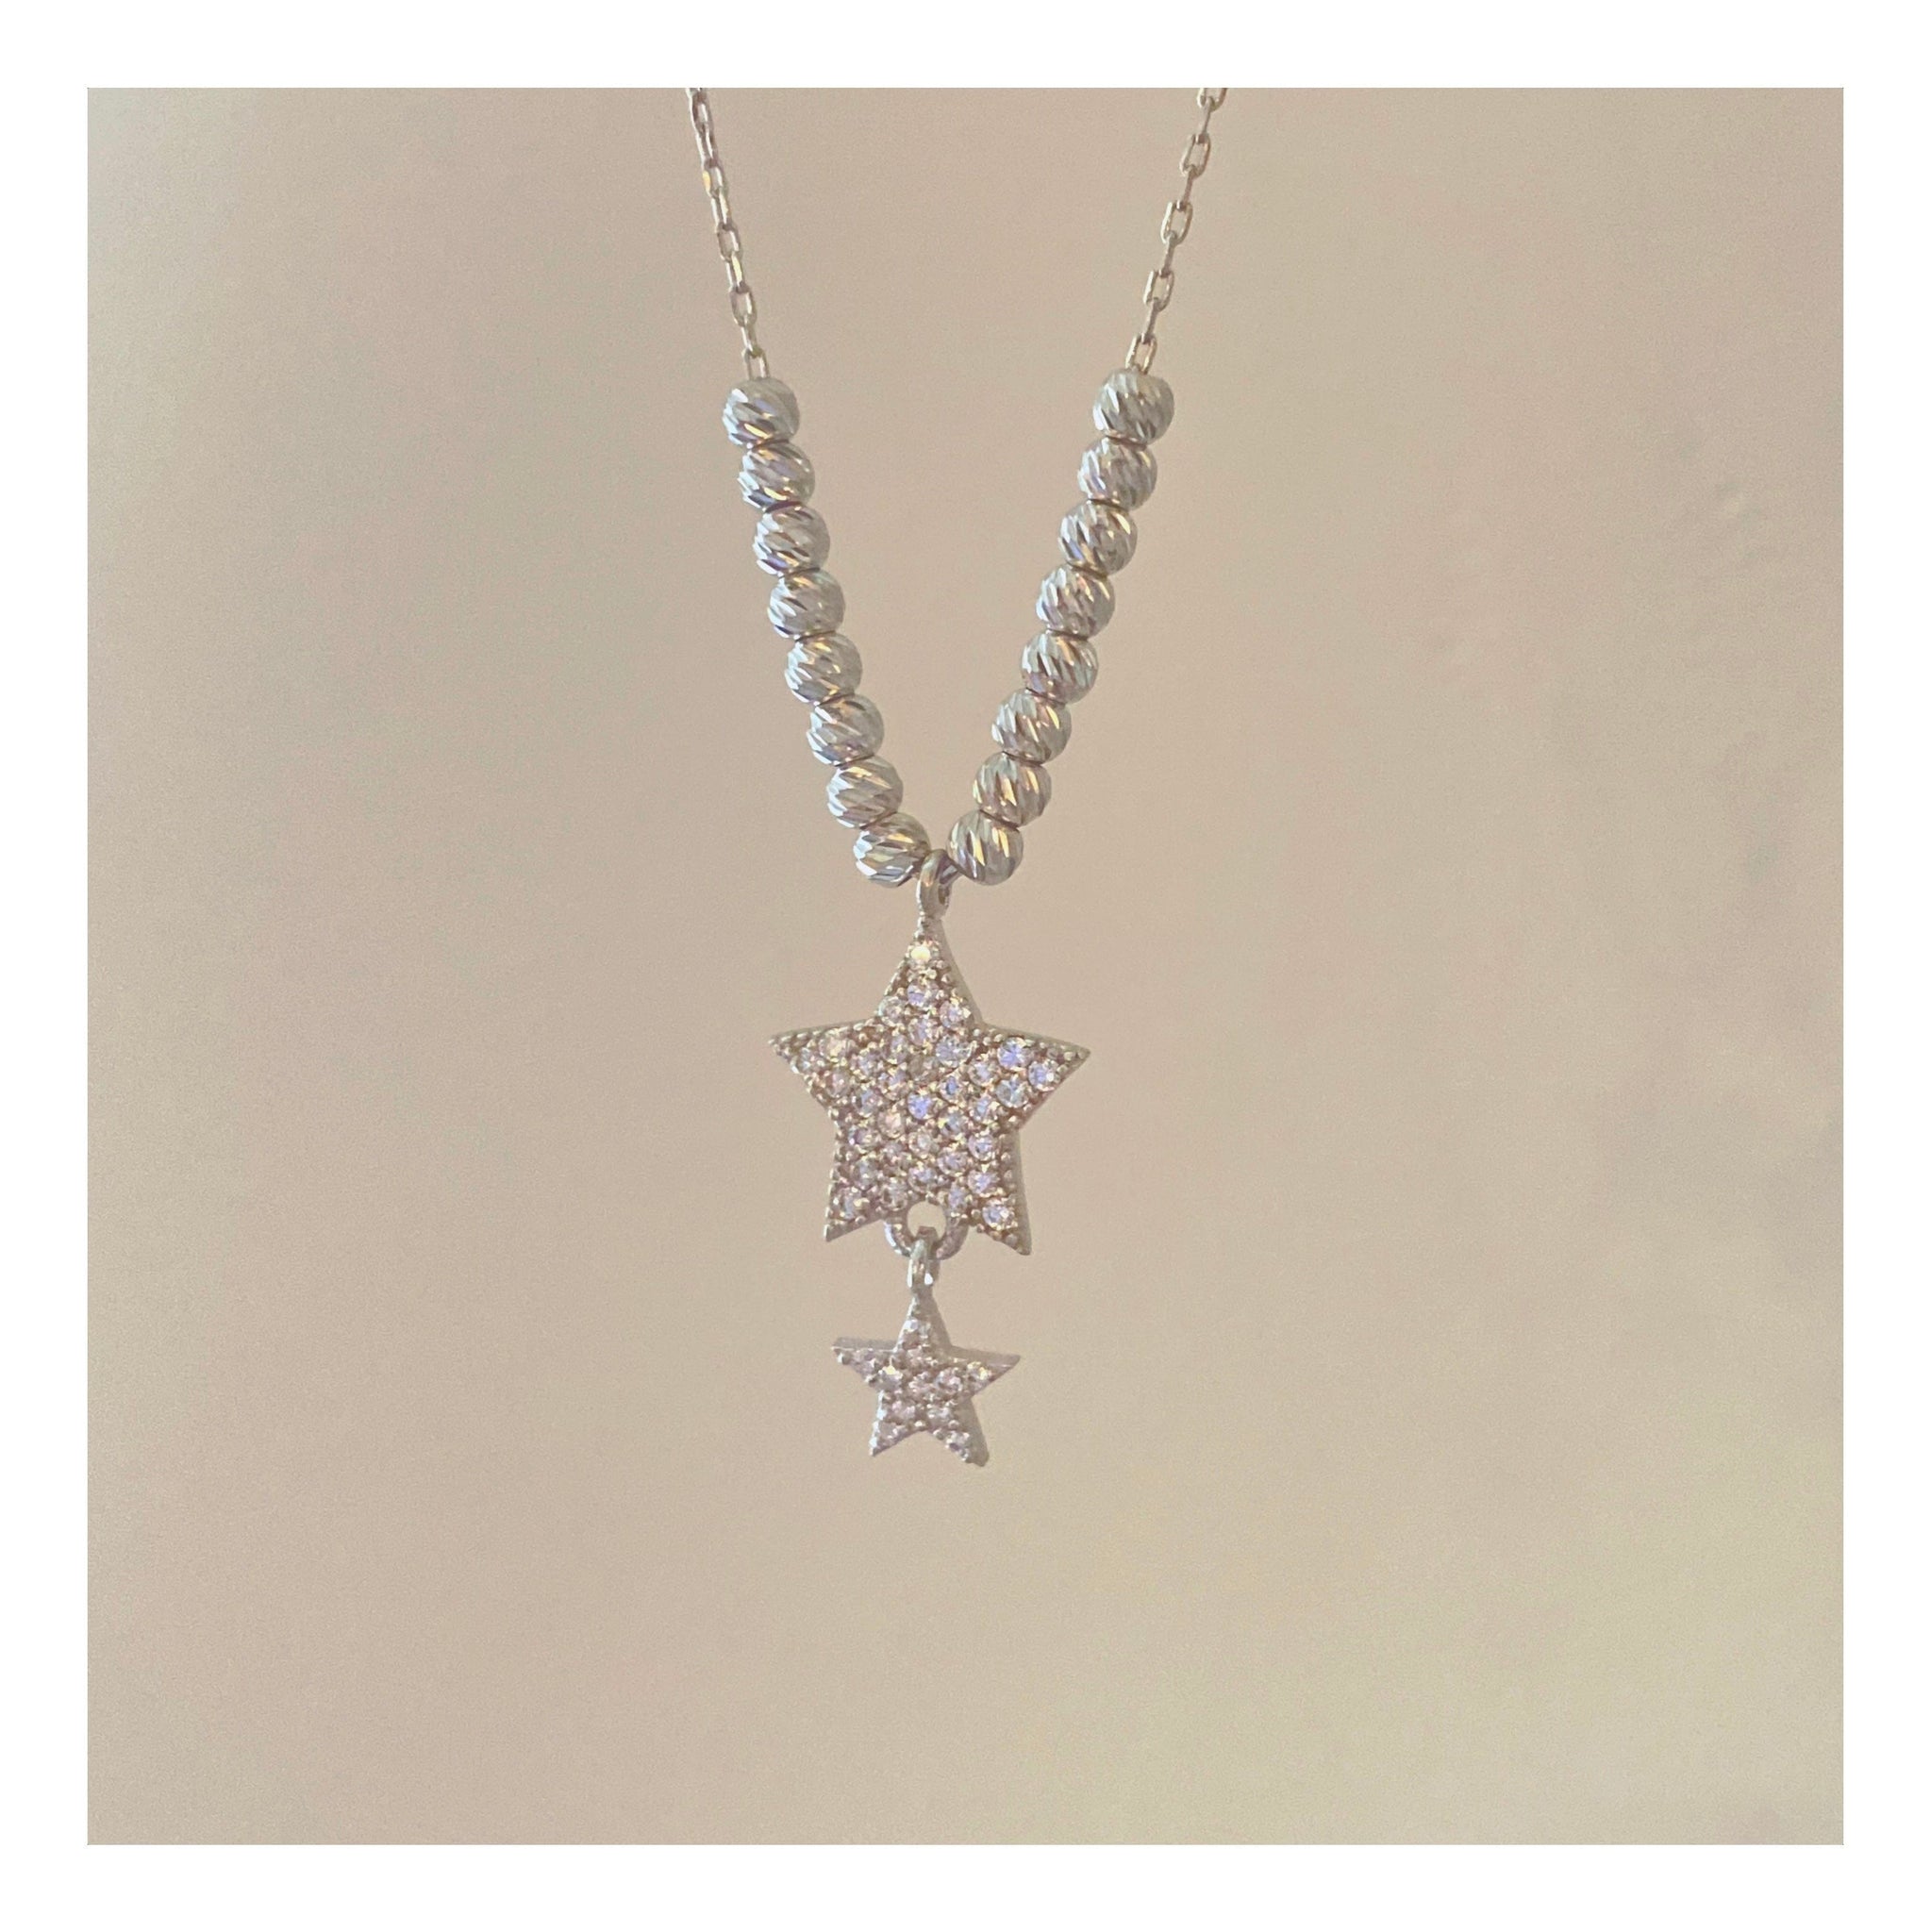 close up of the center of this necklace, has diamond cut rhodium over sterling silver gold beads , 8 on each side, and center has a large star, followed by a smaller star hanging off the larger one. both stars are 